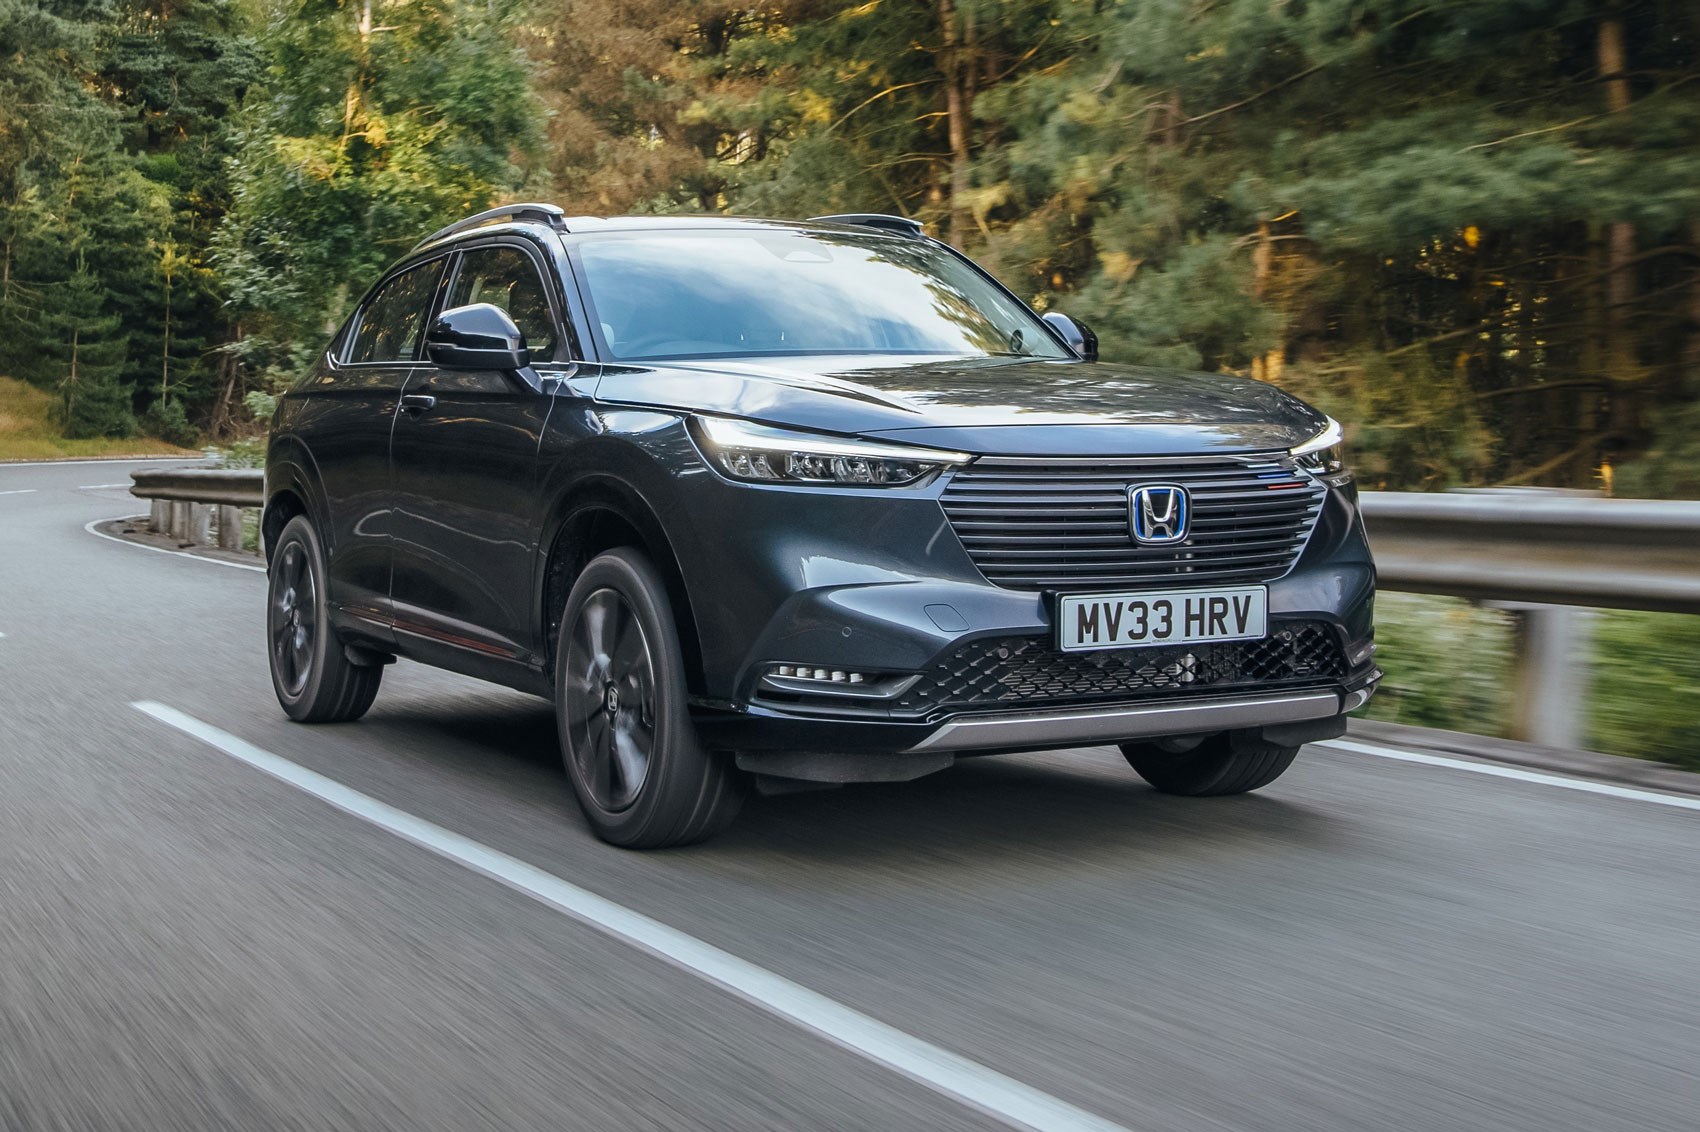 New 2023 Honda CR-V: UK pricing and specifications revealed